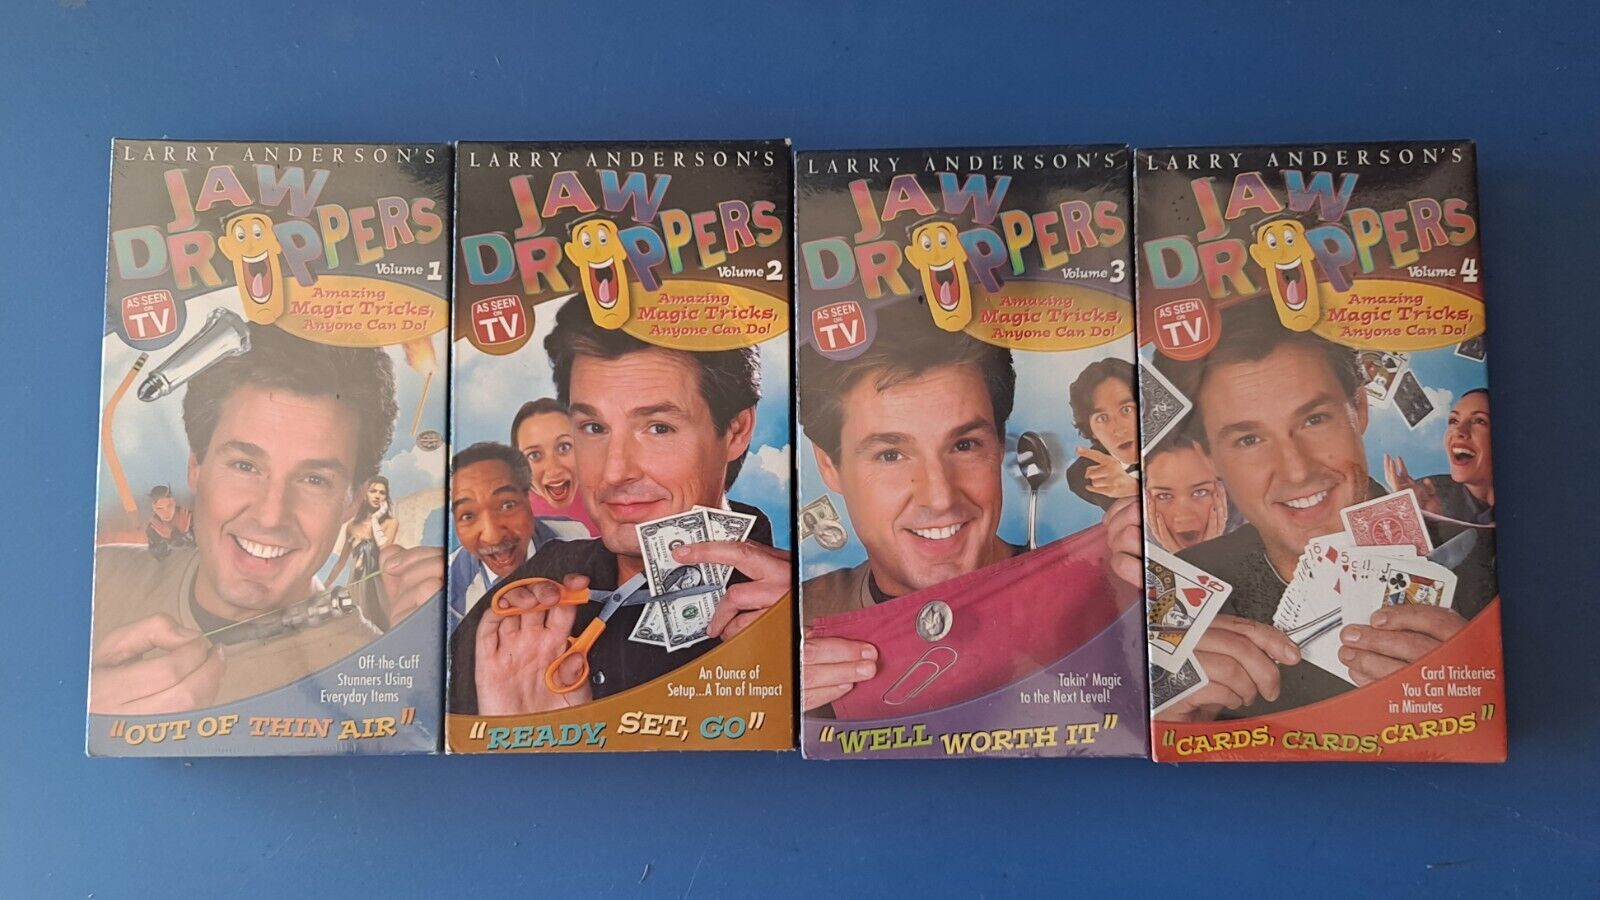 Larry Anderson\'s Jaw Droppers Vol. 1-4 Magic Tricks Anyone Can Do 2000 NEW VHS